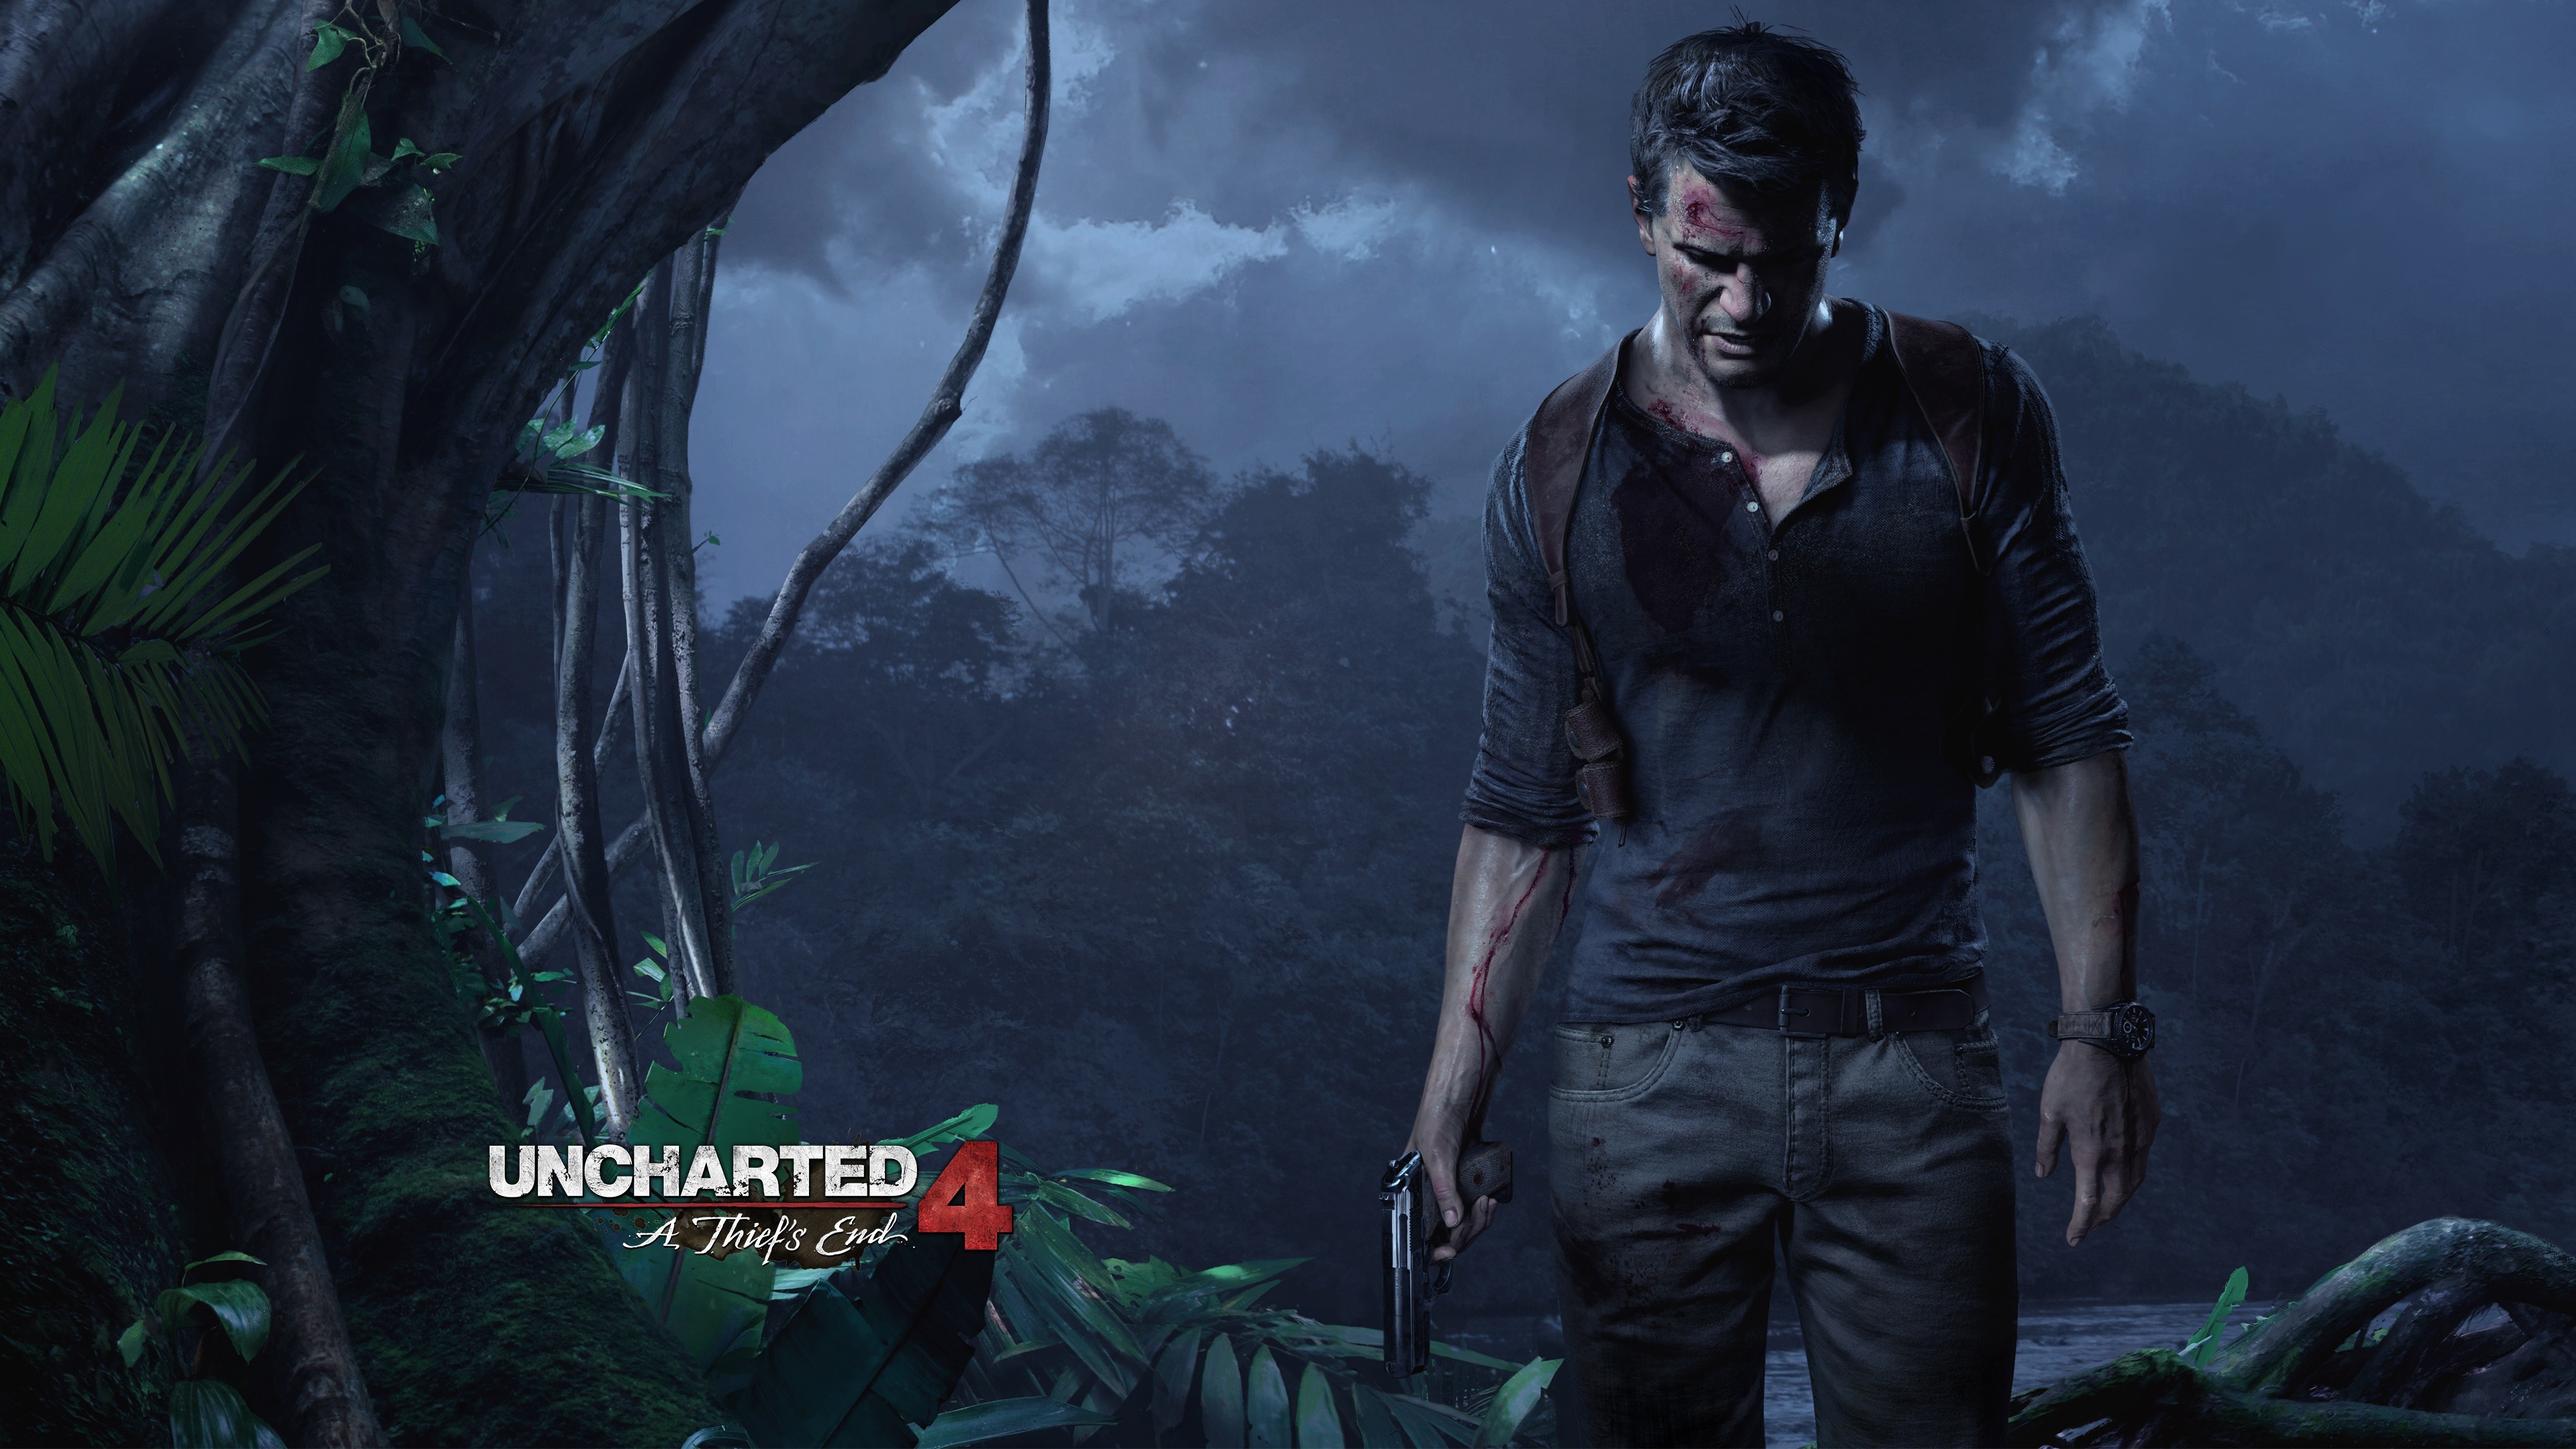 uncharted_4_a_thiefs_end_game-3840x2160.jpg